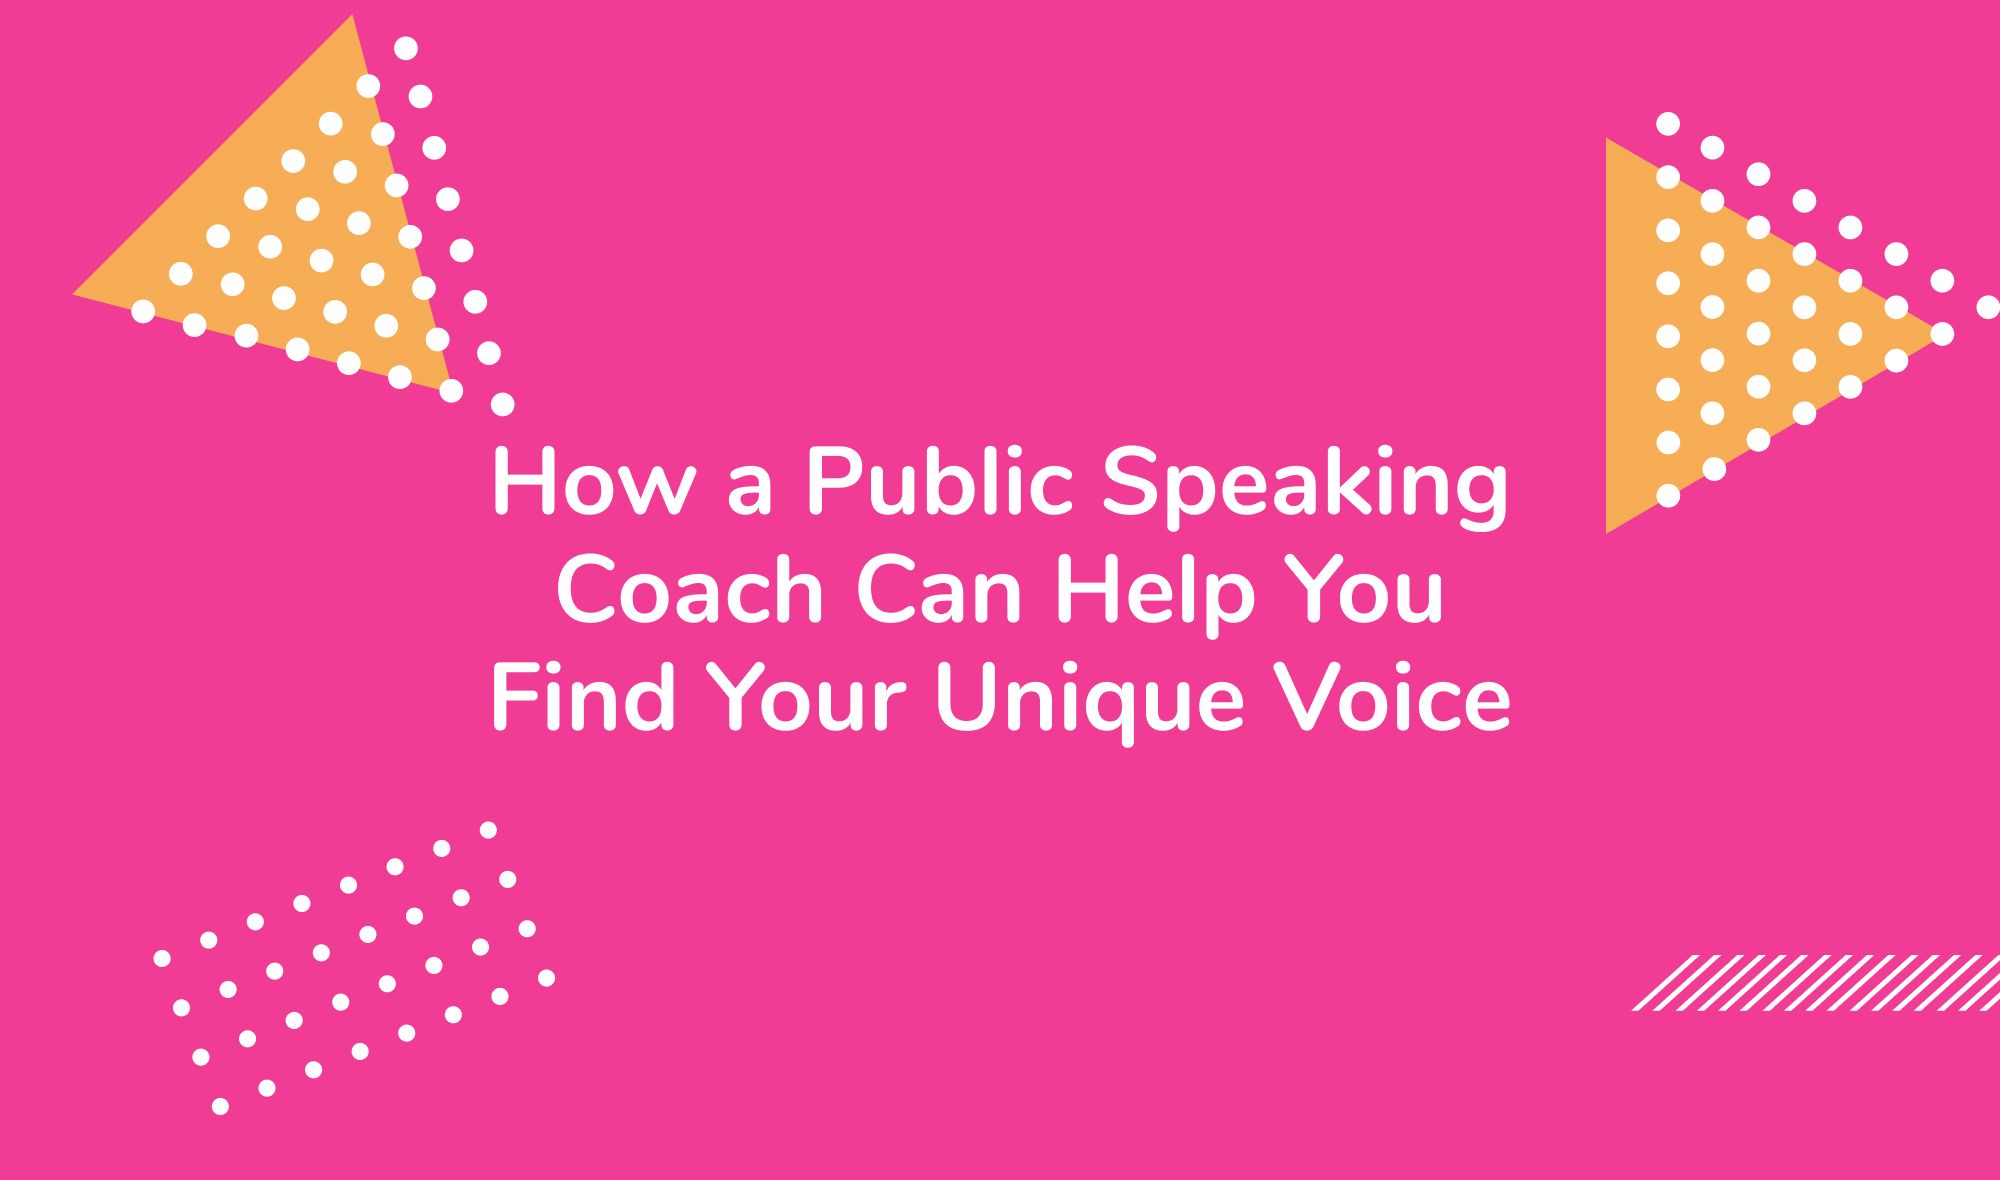 How a Public Speaking Coach Can Help You Find Your Unique Voice